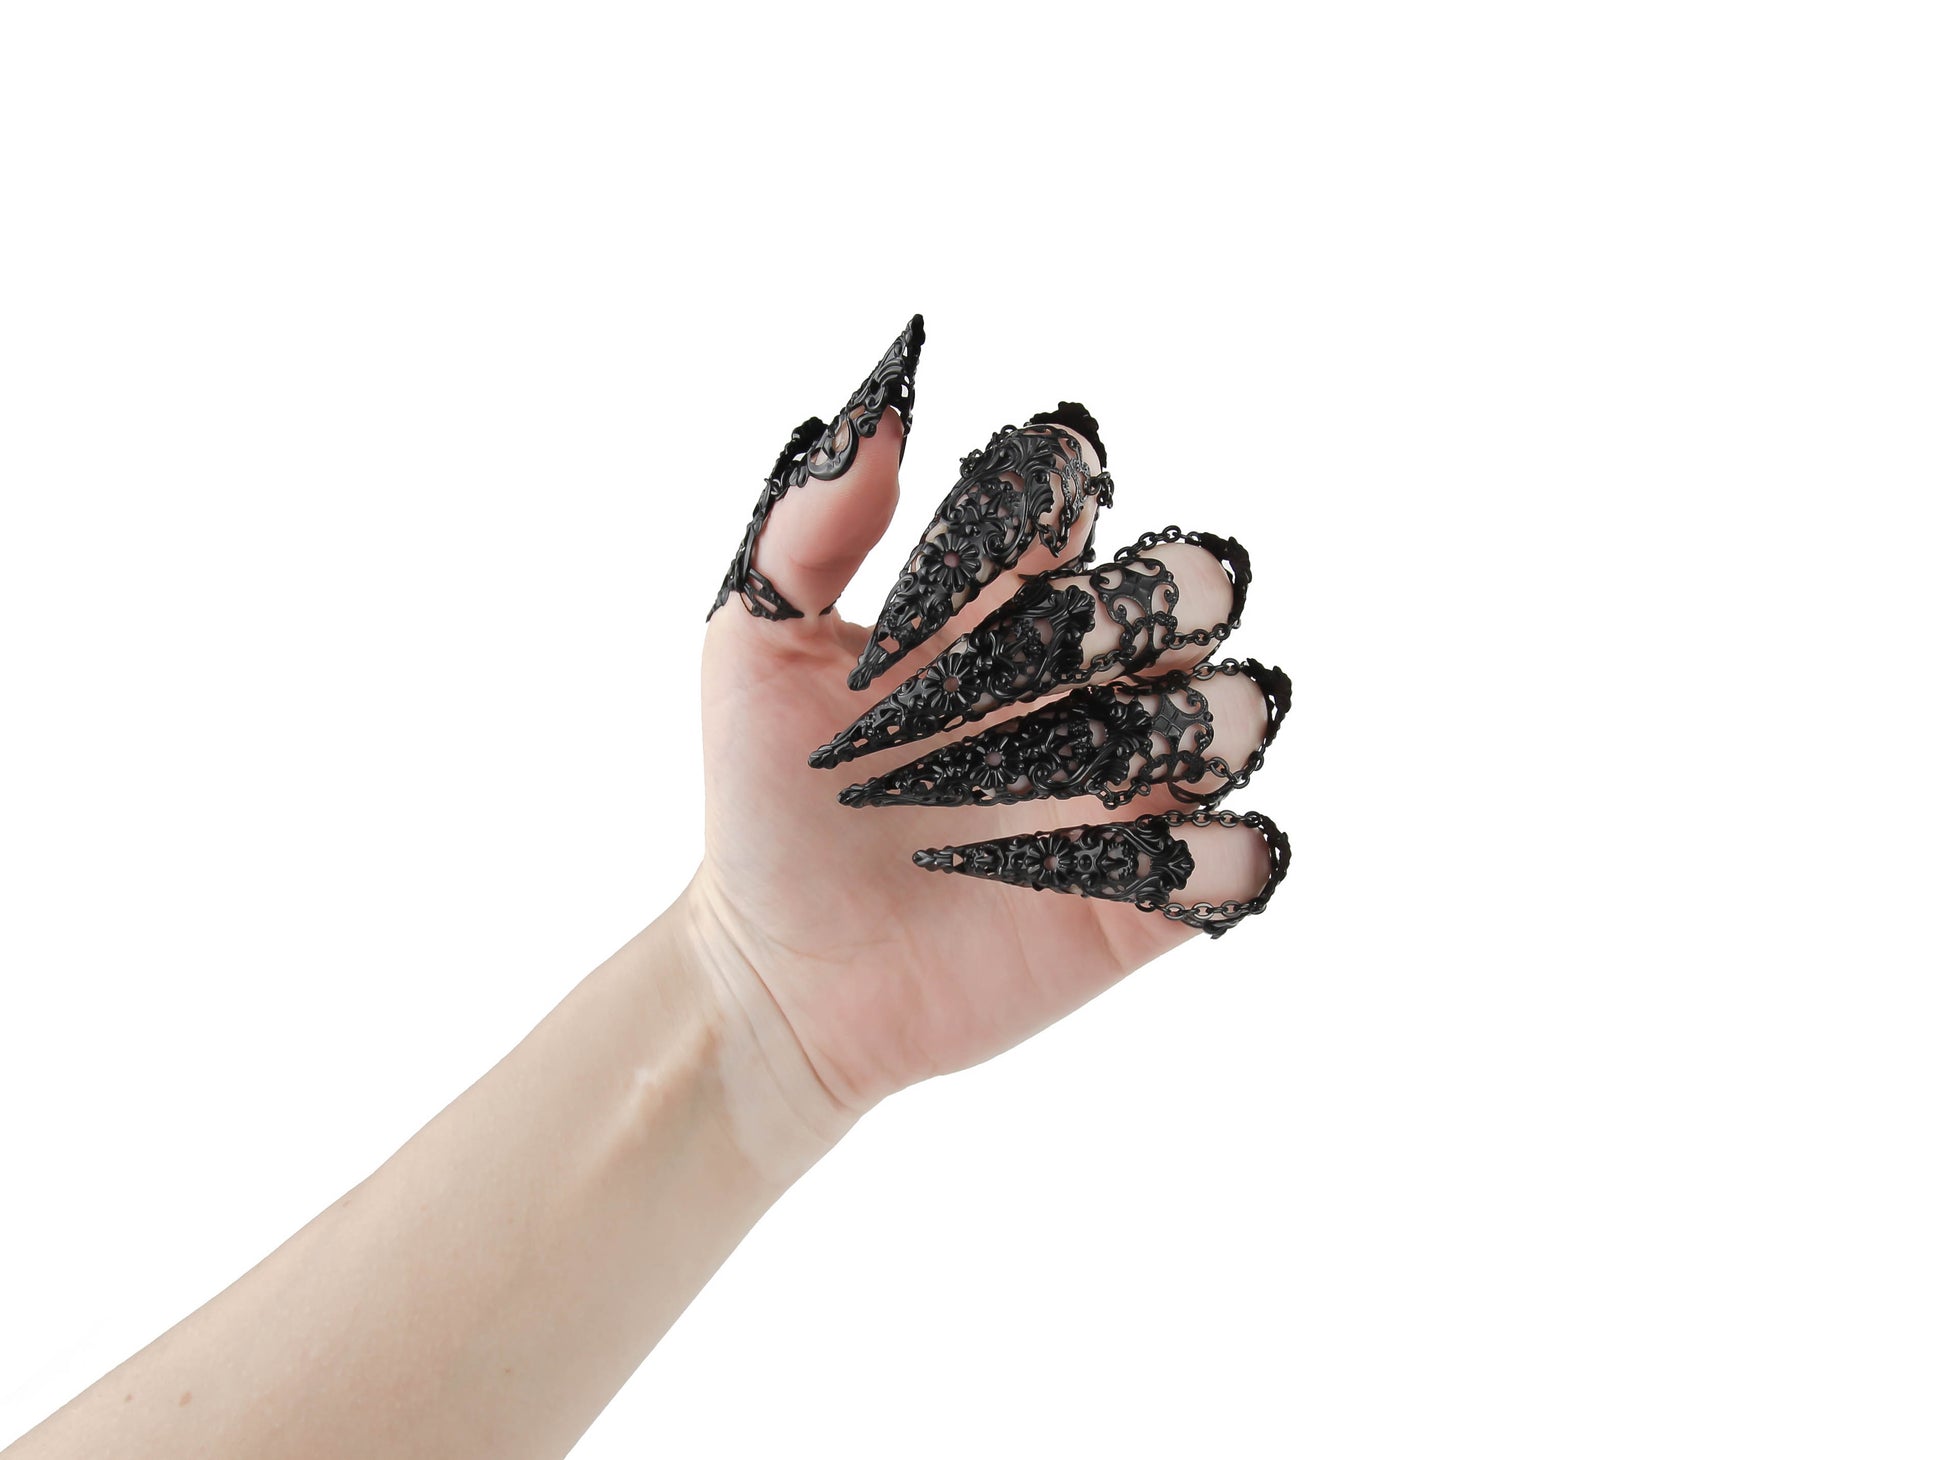 Dramatic Myril Jewels black finger armor rings, embracing a neo-gothic design, adorn a almost closed hand against a white backdrop. Perfect for gothic-chic, punk, and witchcore enthusiasts, these rings are a bold choice for Halloween events or to add an avant-garde edge to any outfit.